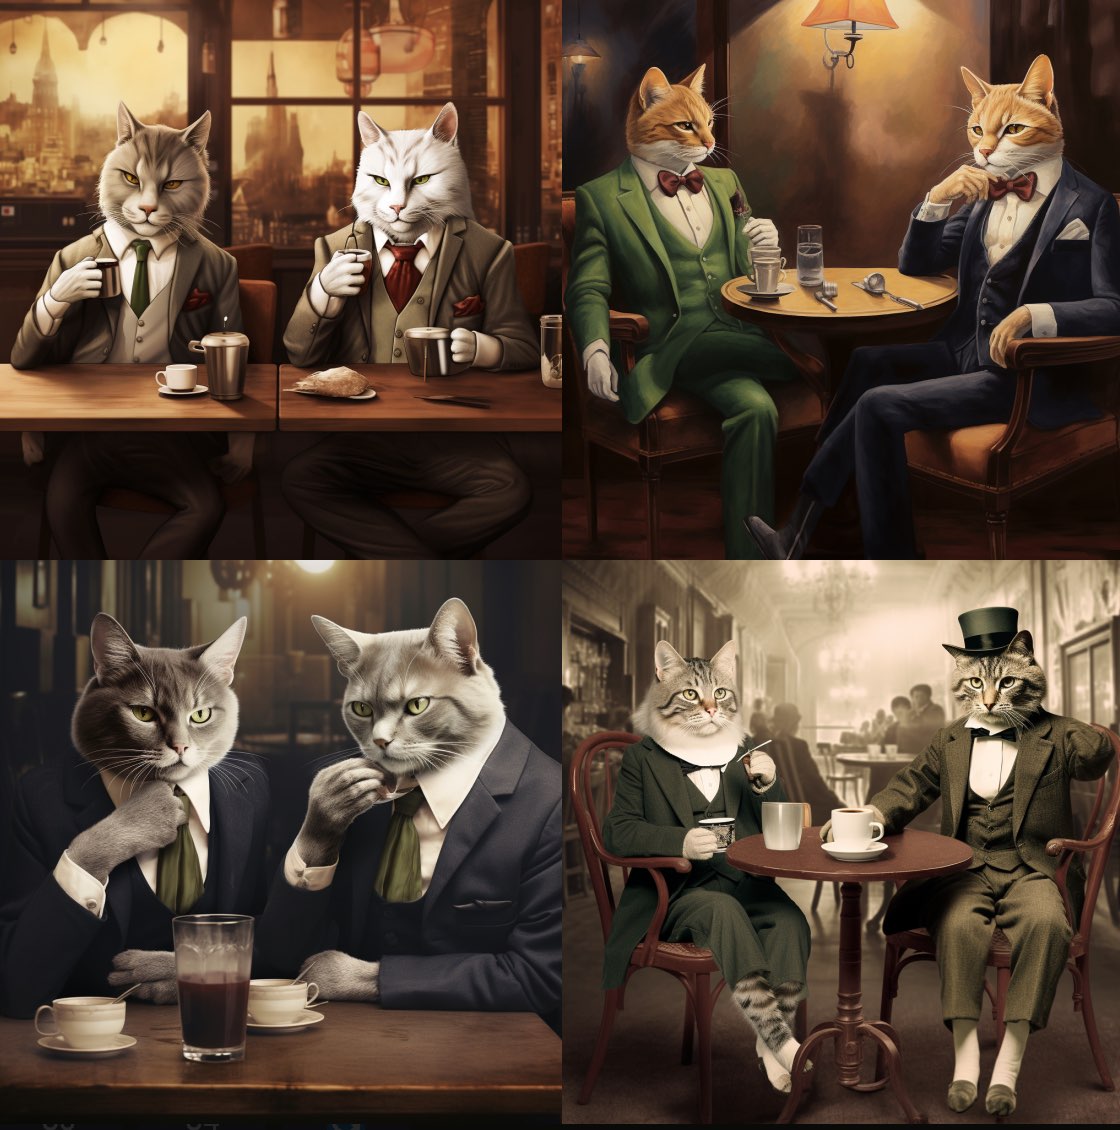 anthropomorph cats in evening suits, drinkin coffee in a bar 